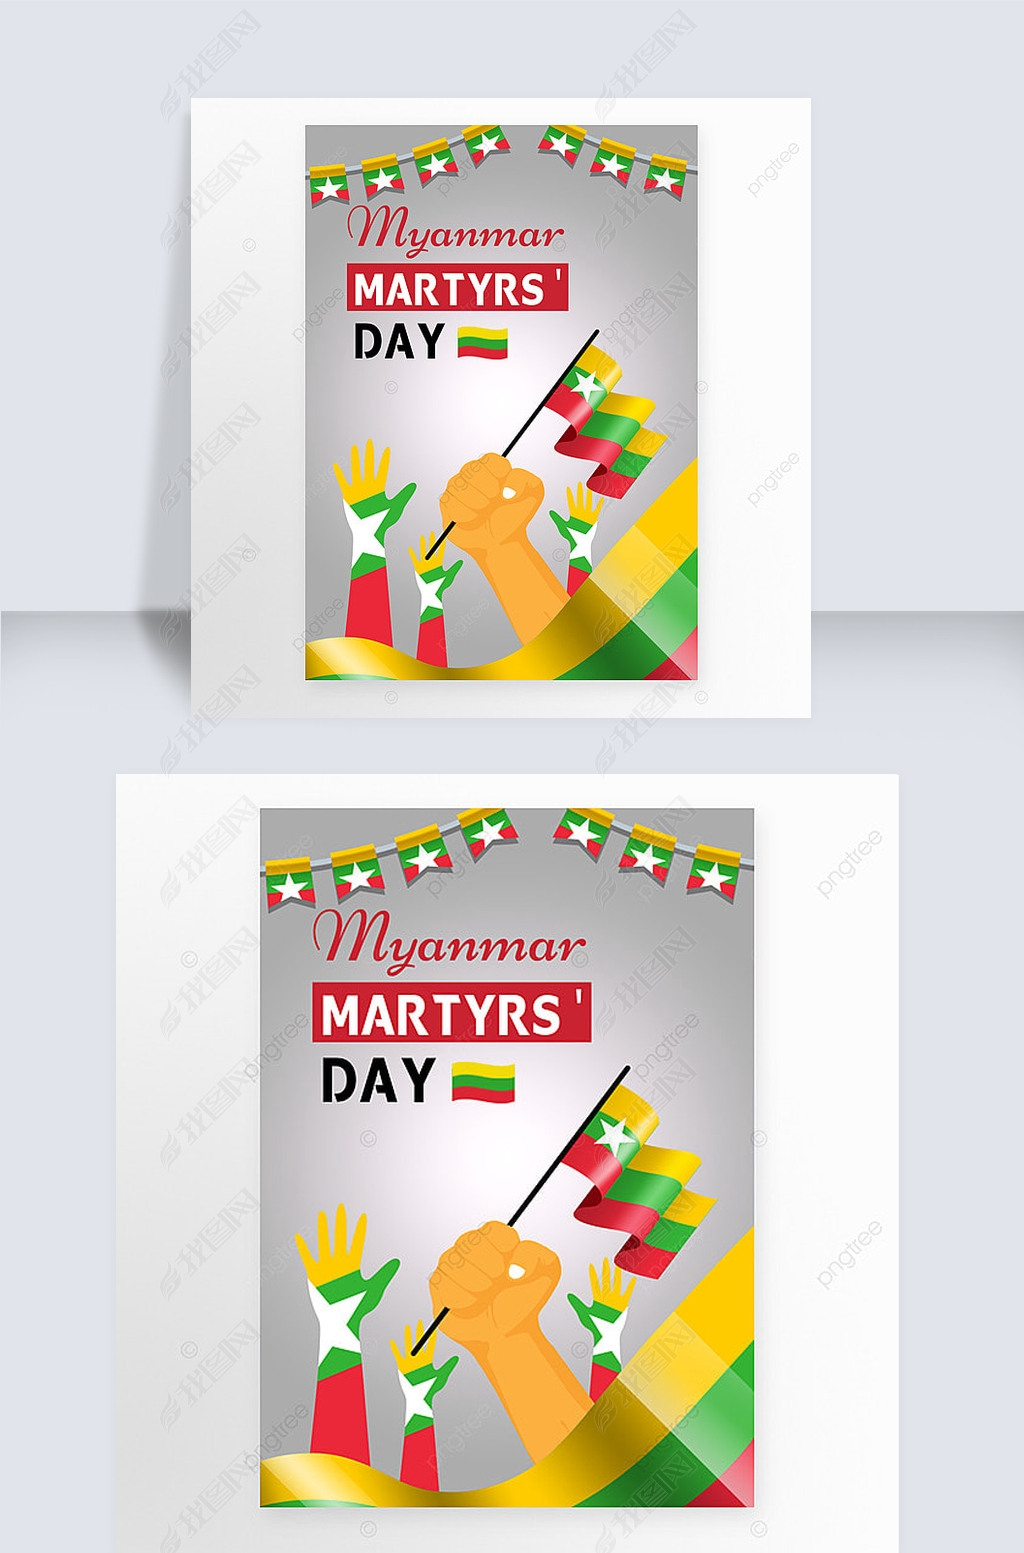 myanmar martyrs daycreative posters